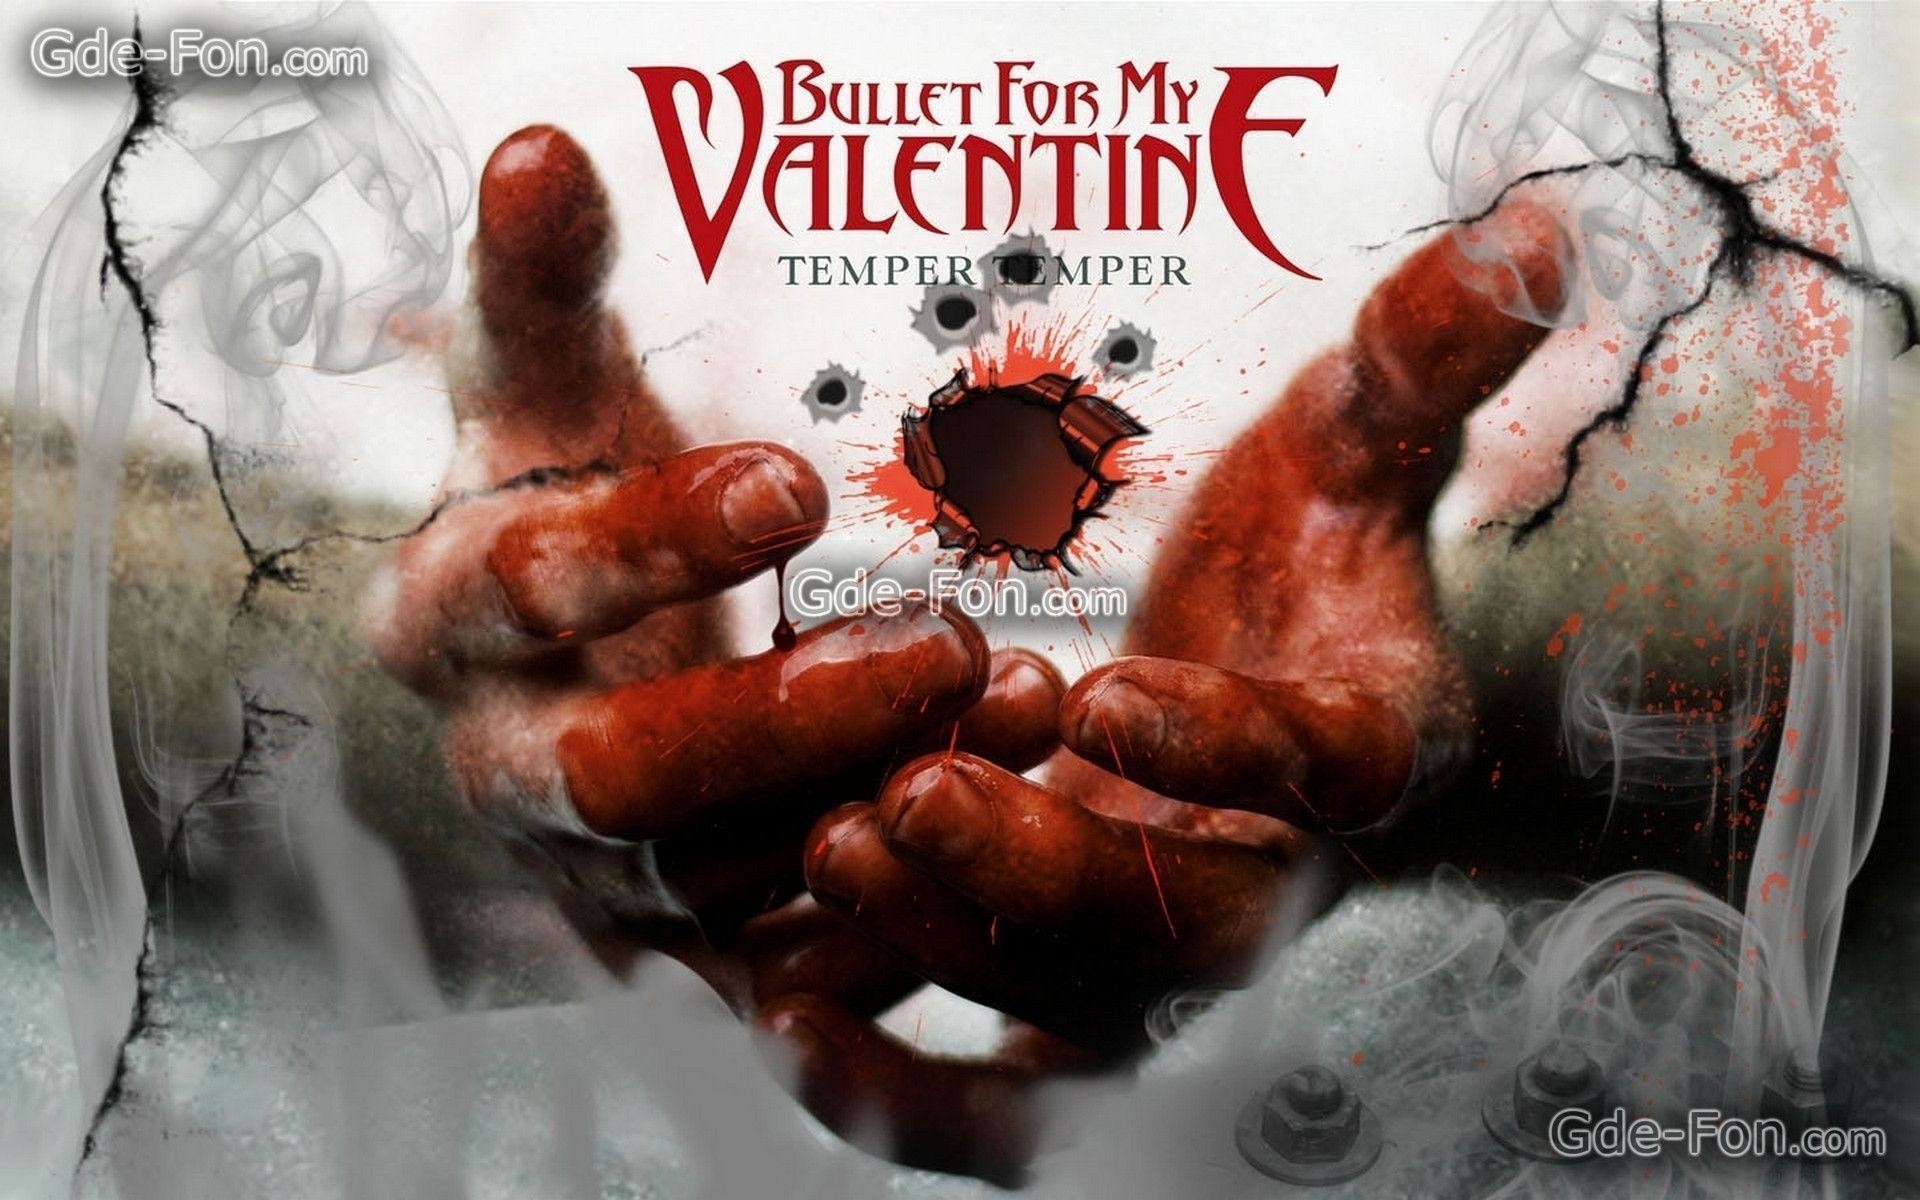 1920x1200 Download wallpaper music, group, bullet for my valentine, album .